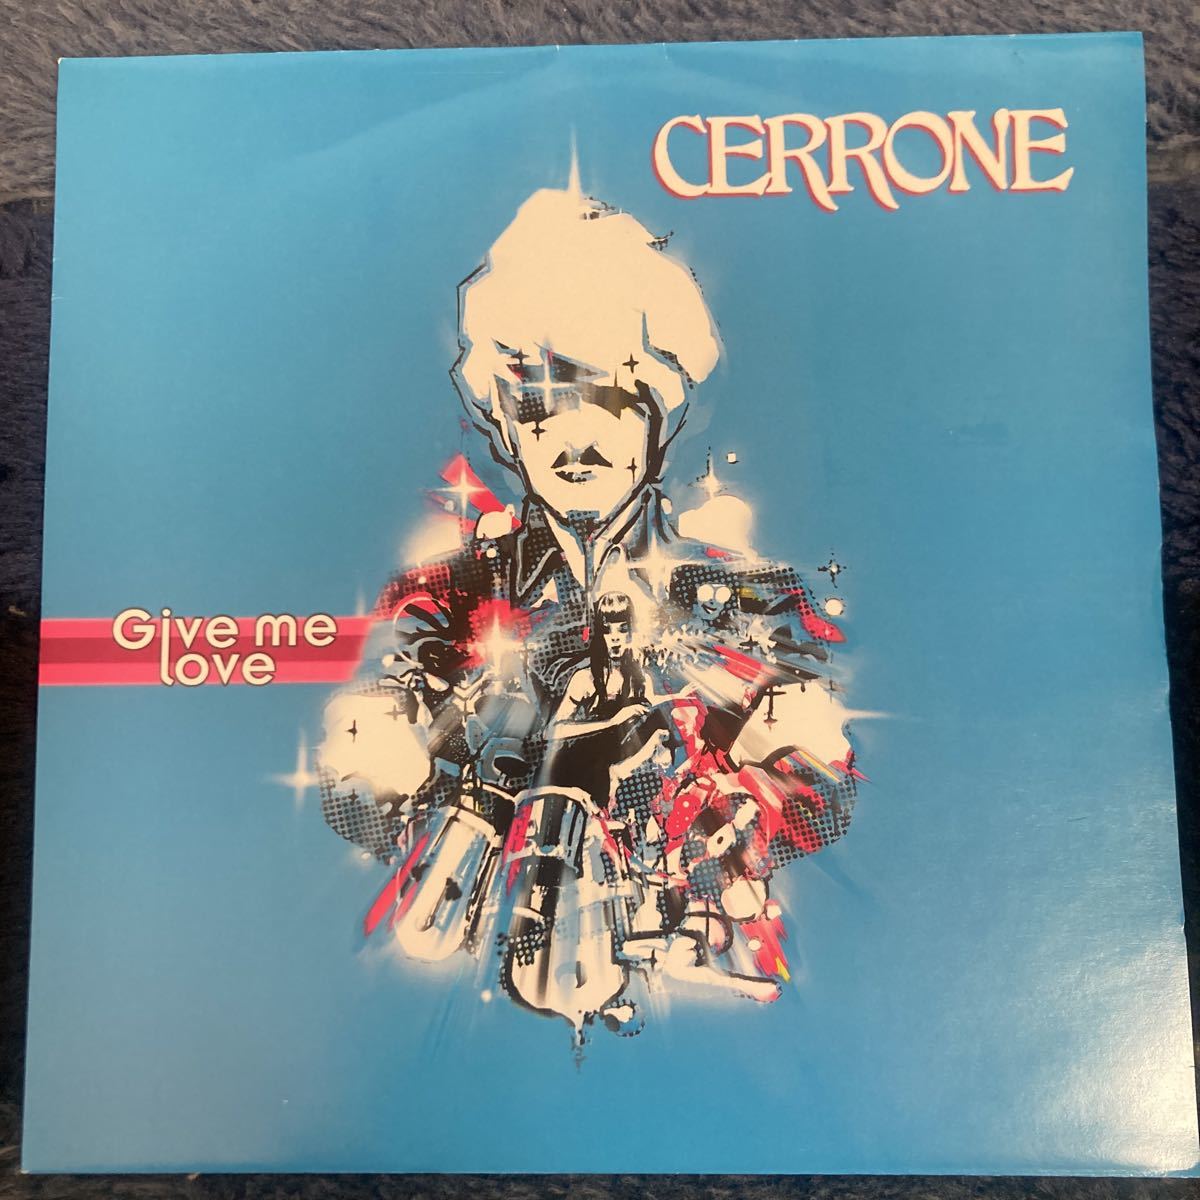 CERRONE、give me love、7インチレコード、インディロック、indie rock、house_画像1